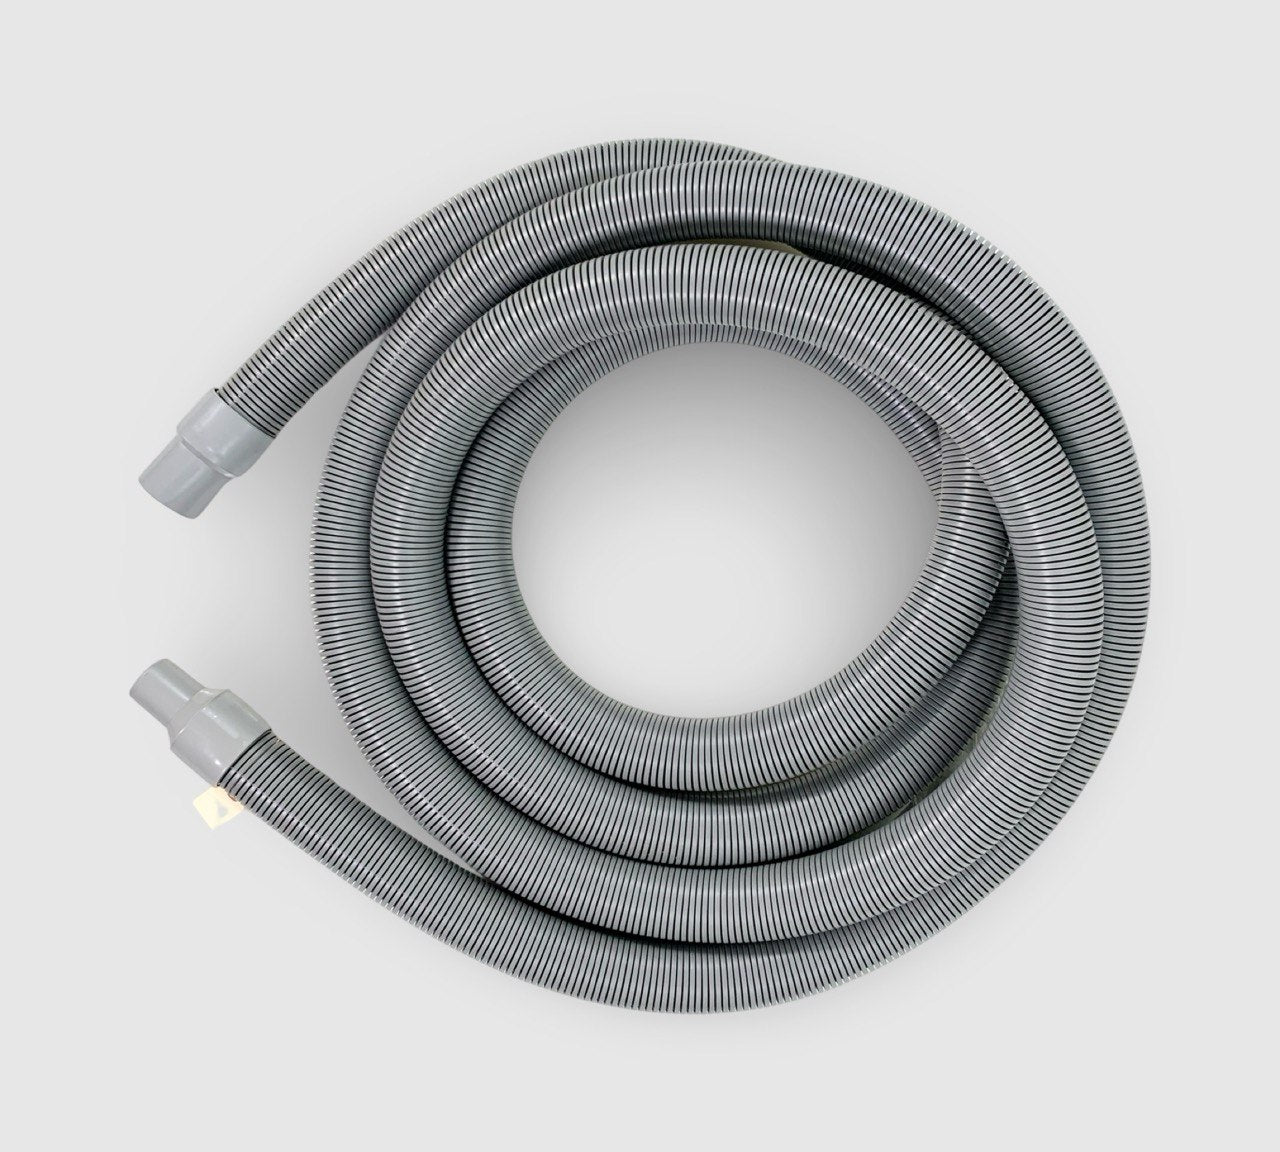 PRE-OWNED 23ft 2 INCH Grey Vacuum Hose - fitted with 2 inch & 1.5 inch Hose Cuffs